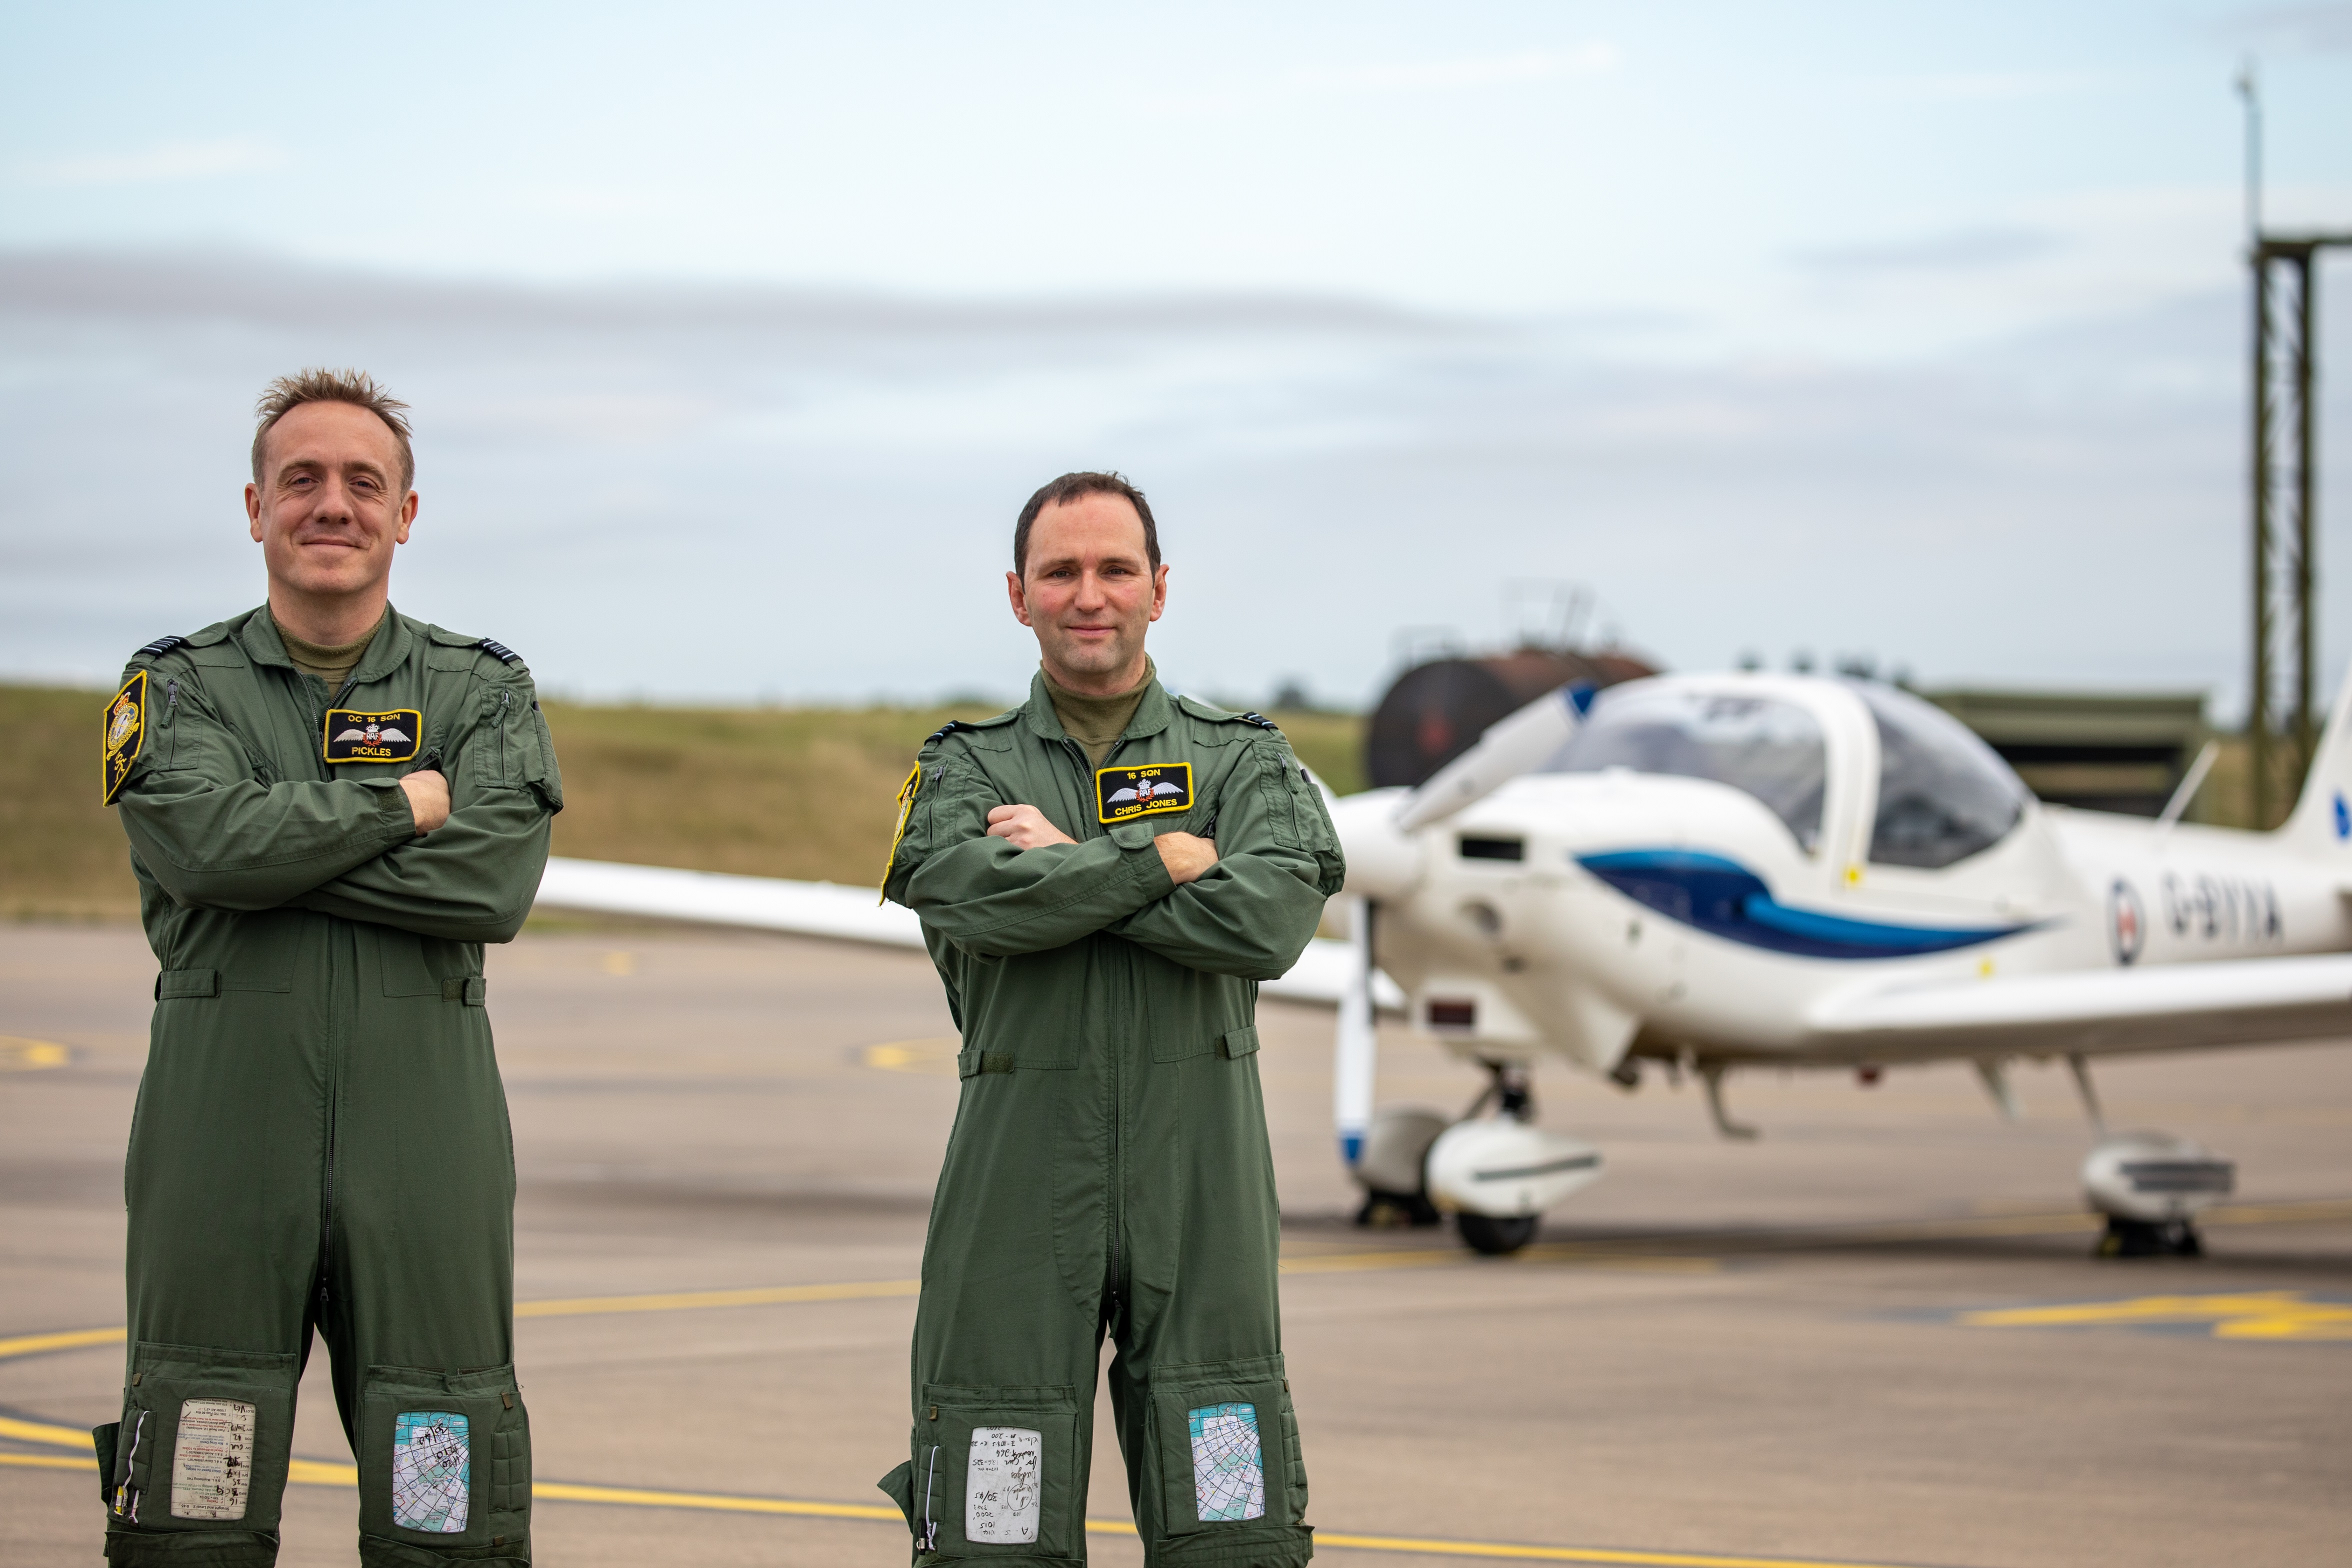 From left to right: Squadron Leader Mark Pickles and Flight Lieutenant Chris Jones